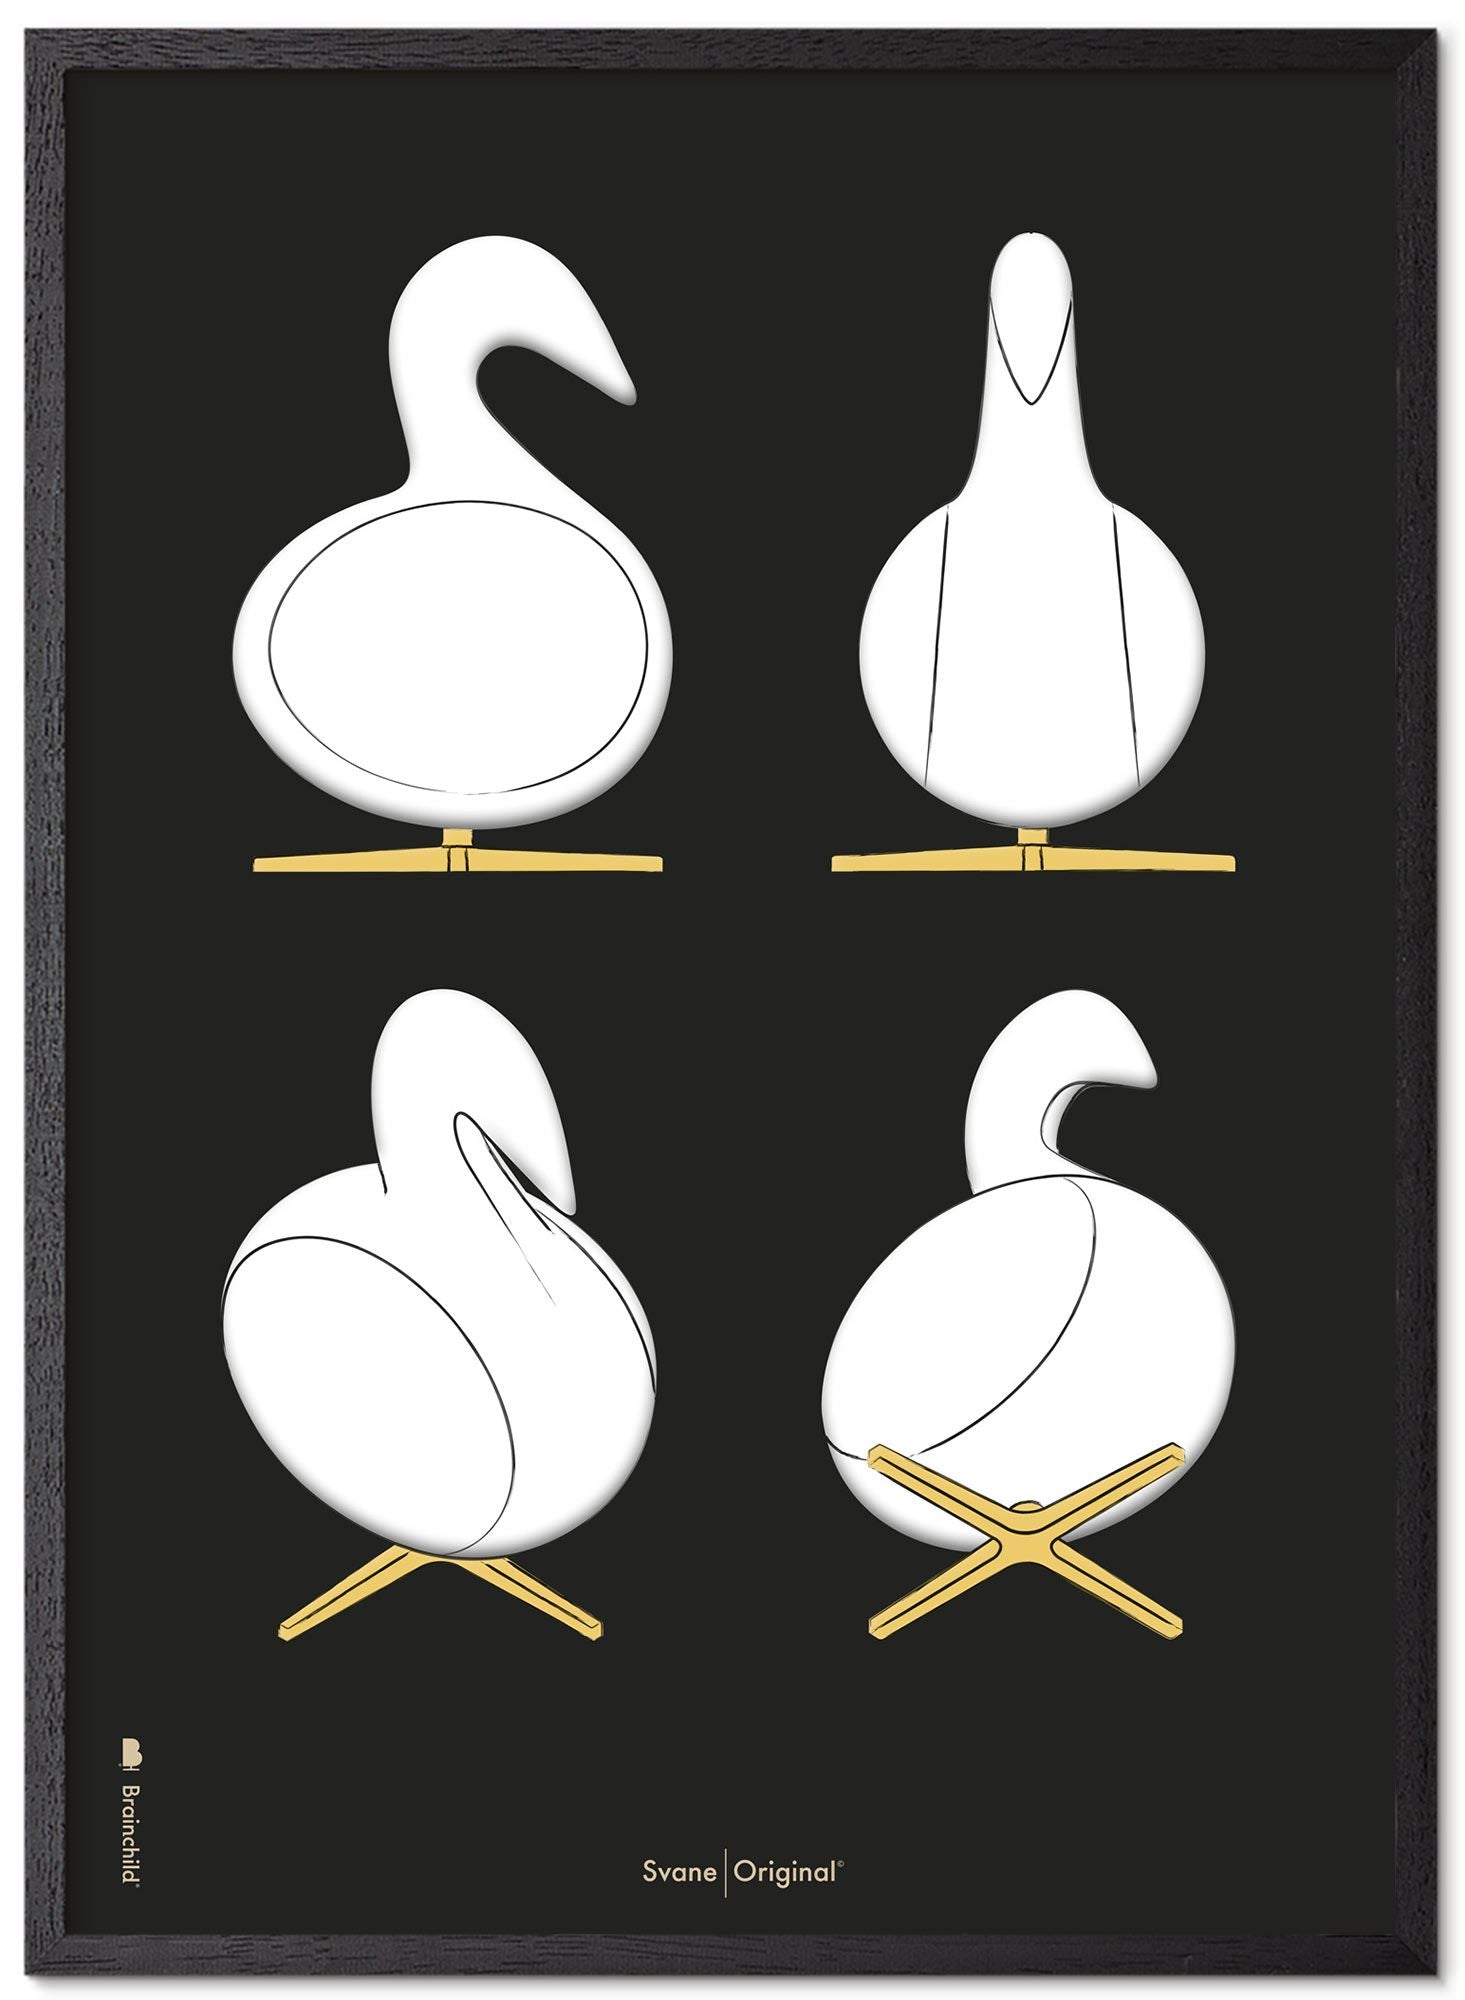 Brainchild Swan Design Sketches Poster Frame Made Of Black Lacquered Wood 70x100 Cm, Black Background